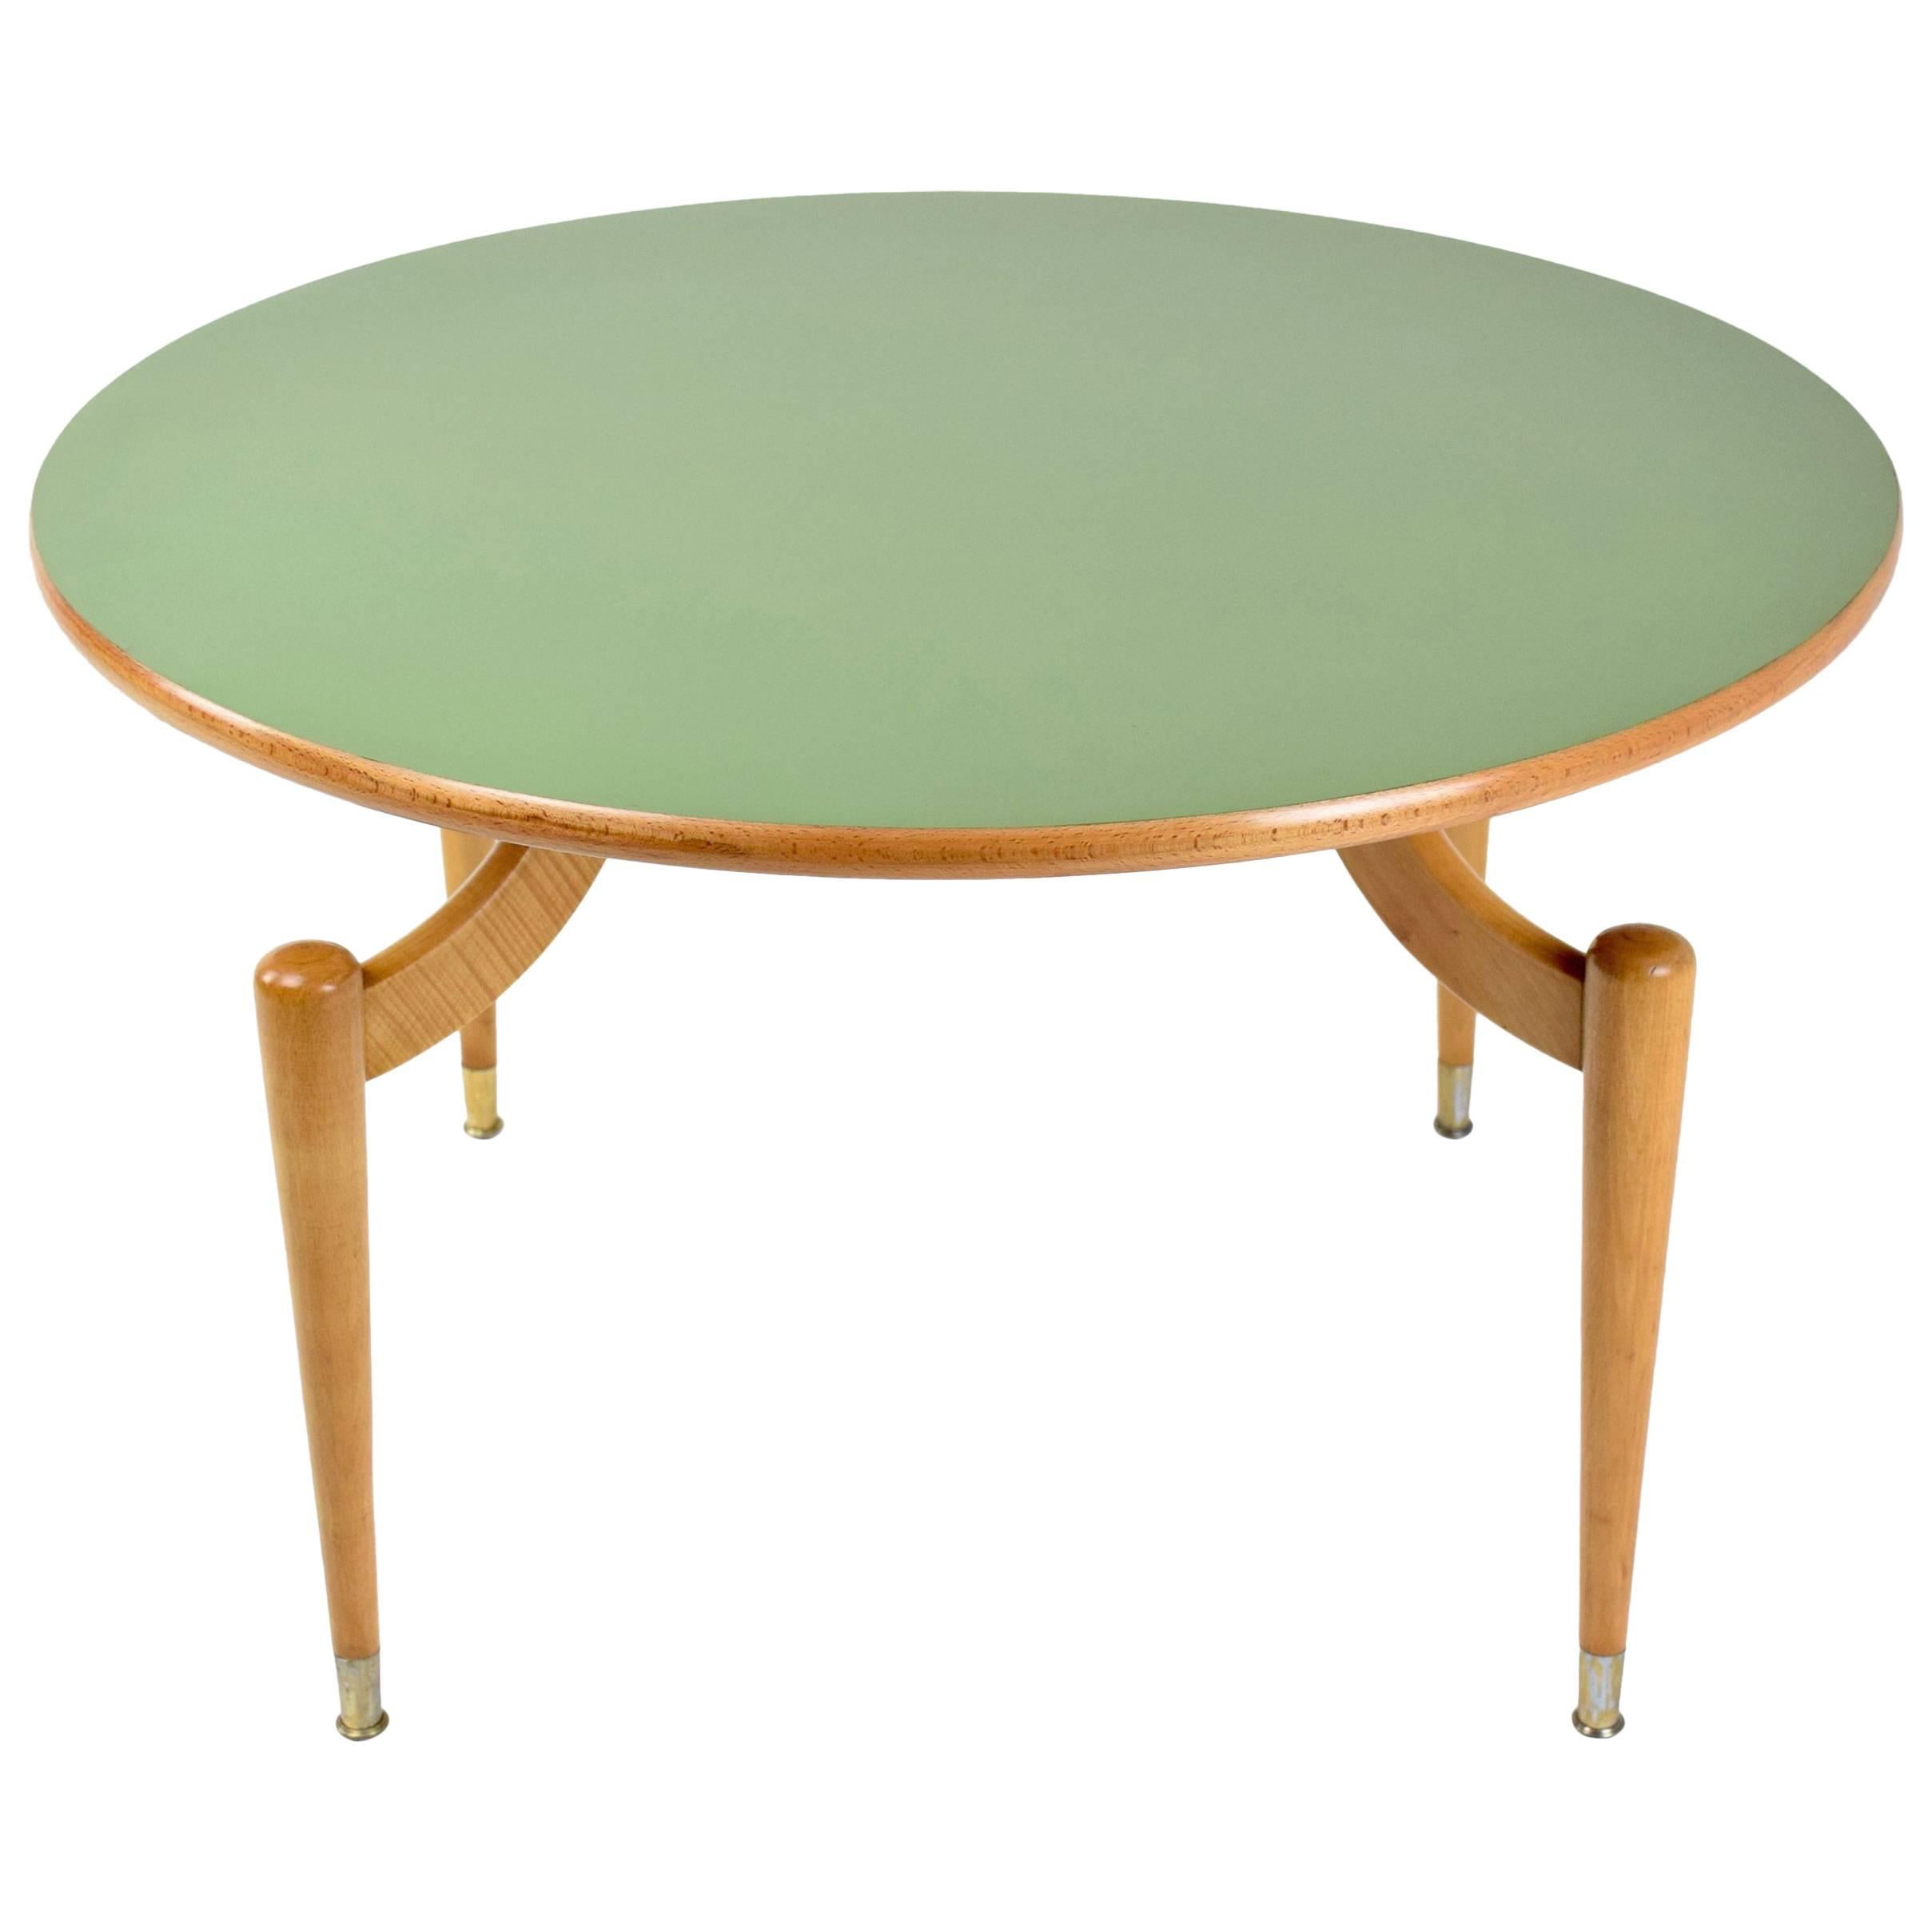 20th Century Italian Vintage Table In the Manner of Ico Parisi 